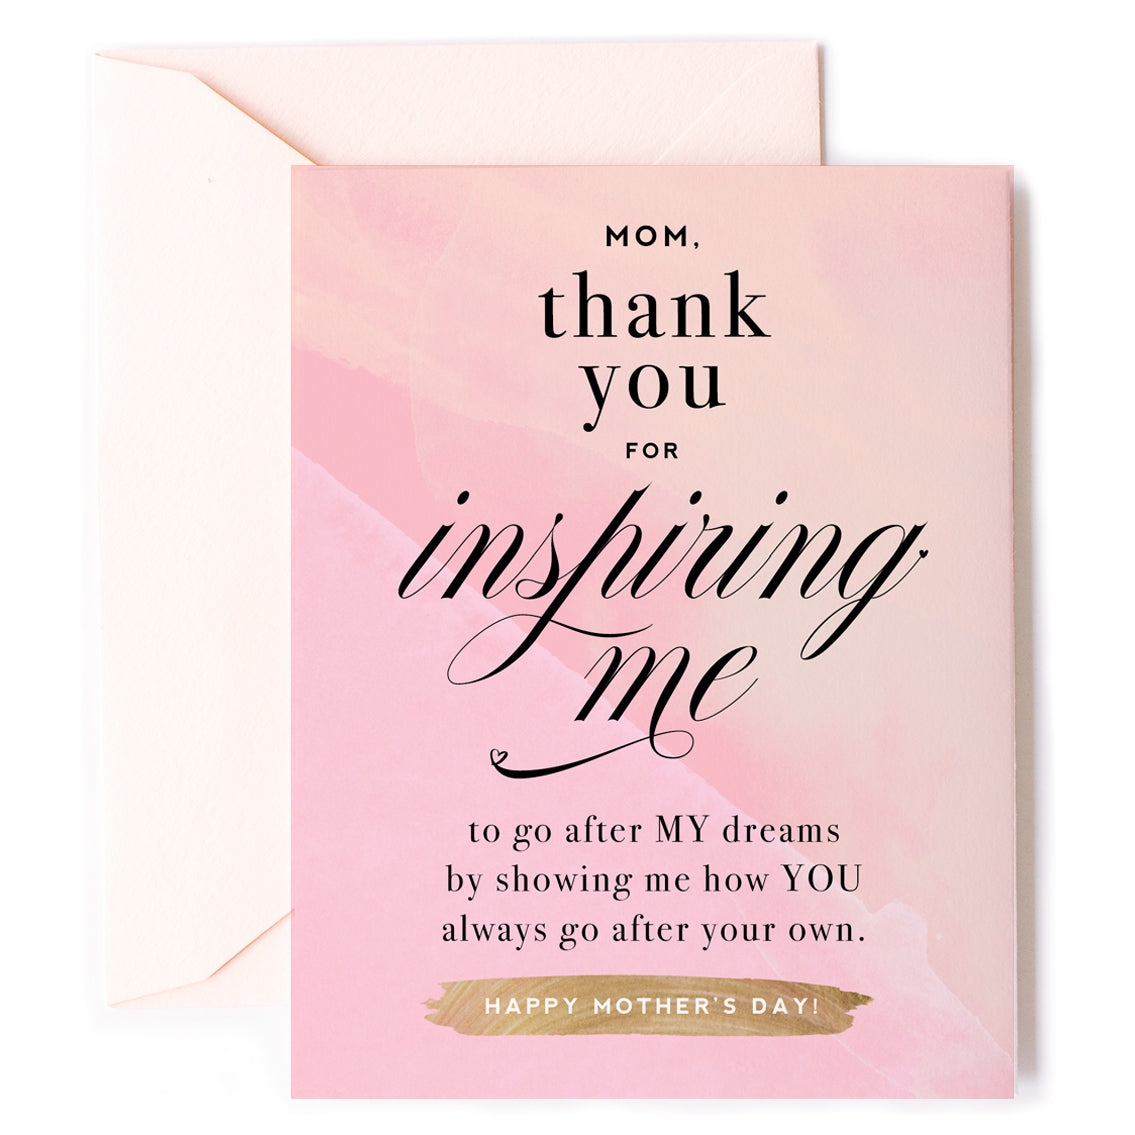 Thank You for Always Inspiring Me - Sweet Mother's Day Card